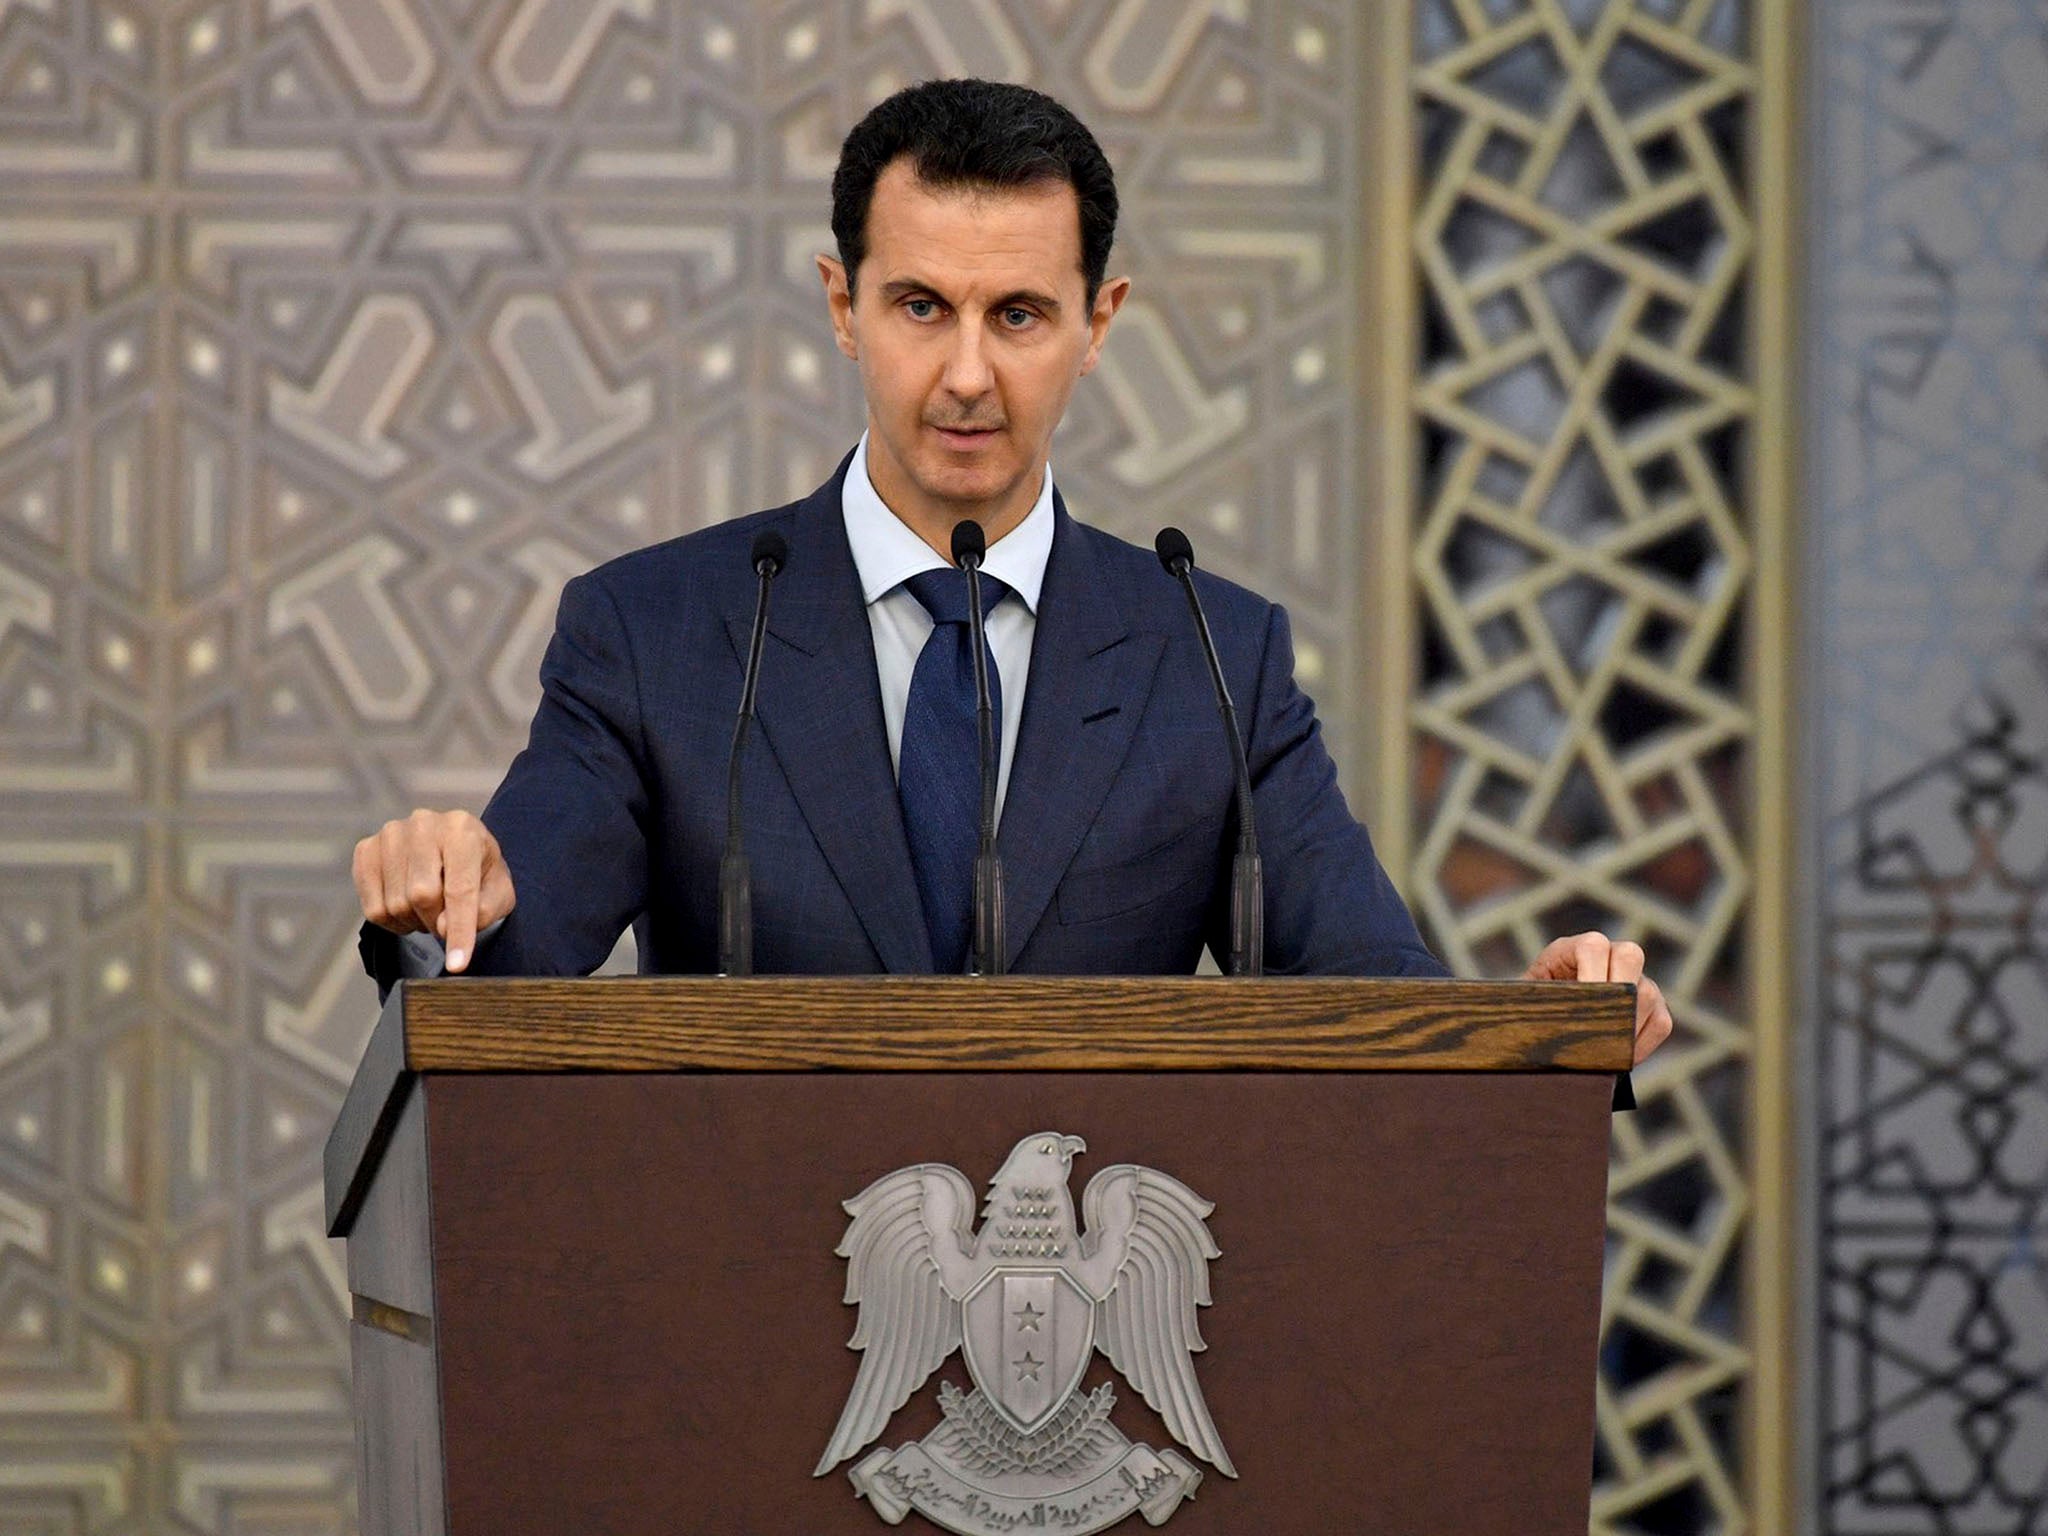 Bashar al-Assad has clung to power since the uprising in his country turned into a bloody war